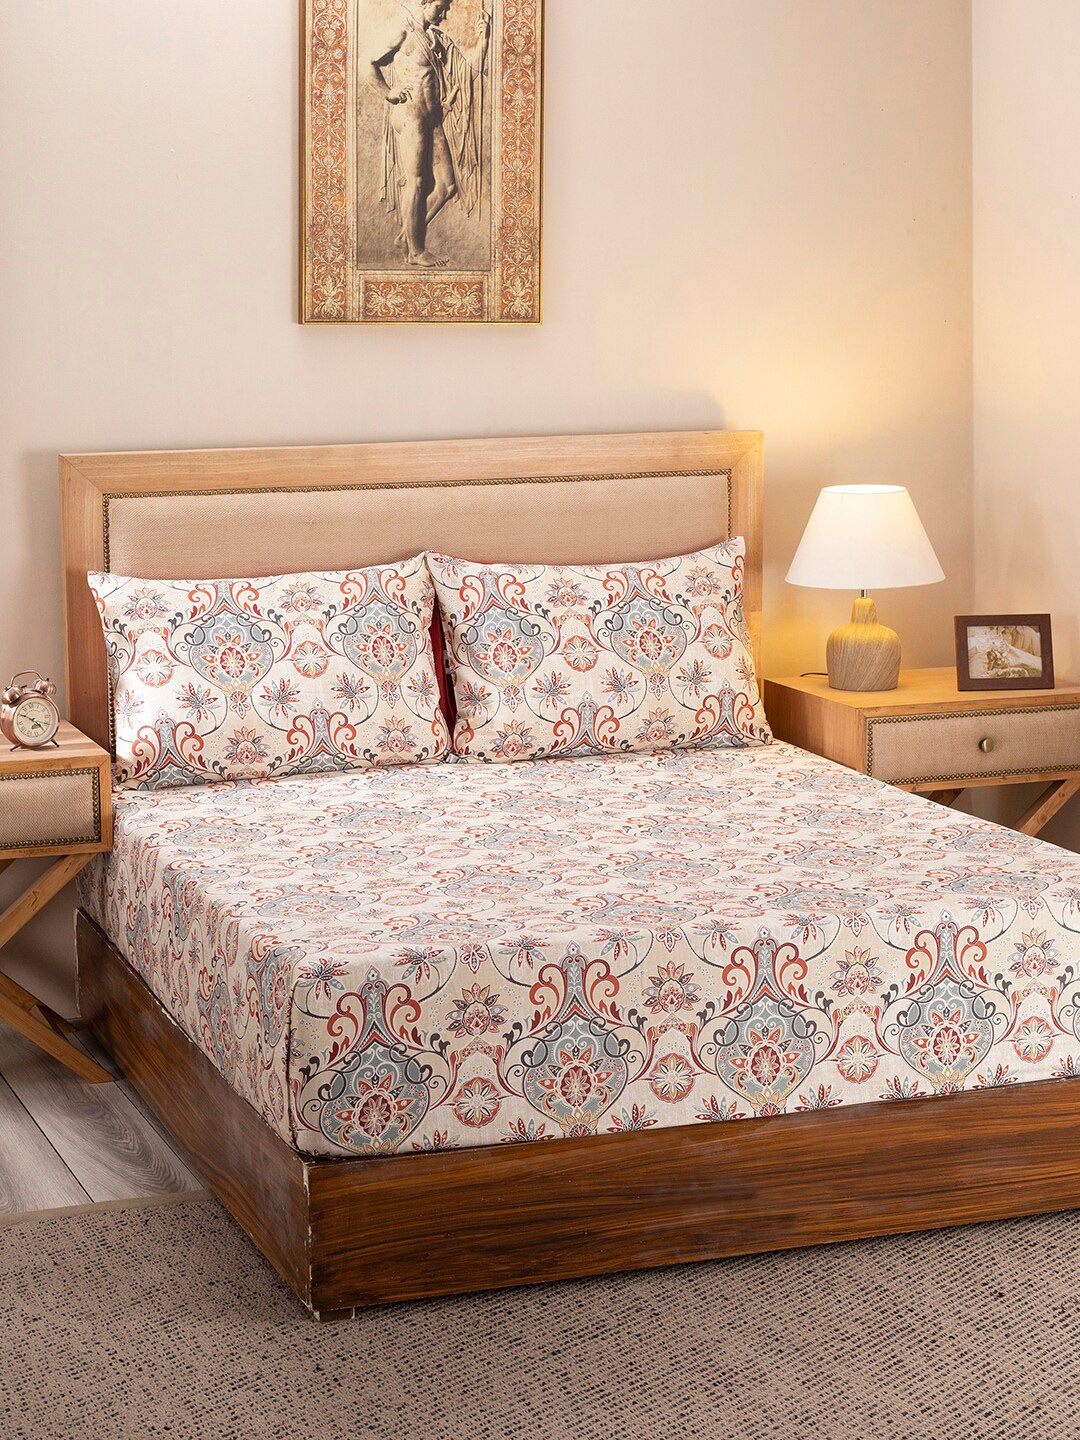 MASPAR Cream-Coloured & Grey Ethnic Motifs 300 TC King Bedsheet with 2 Pillow Covers Price in India